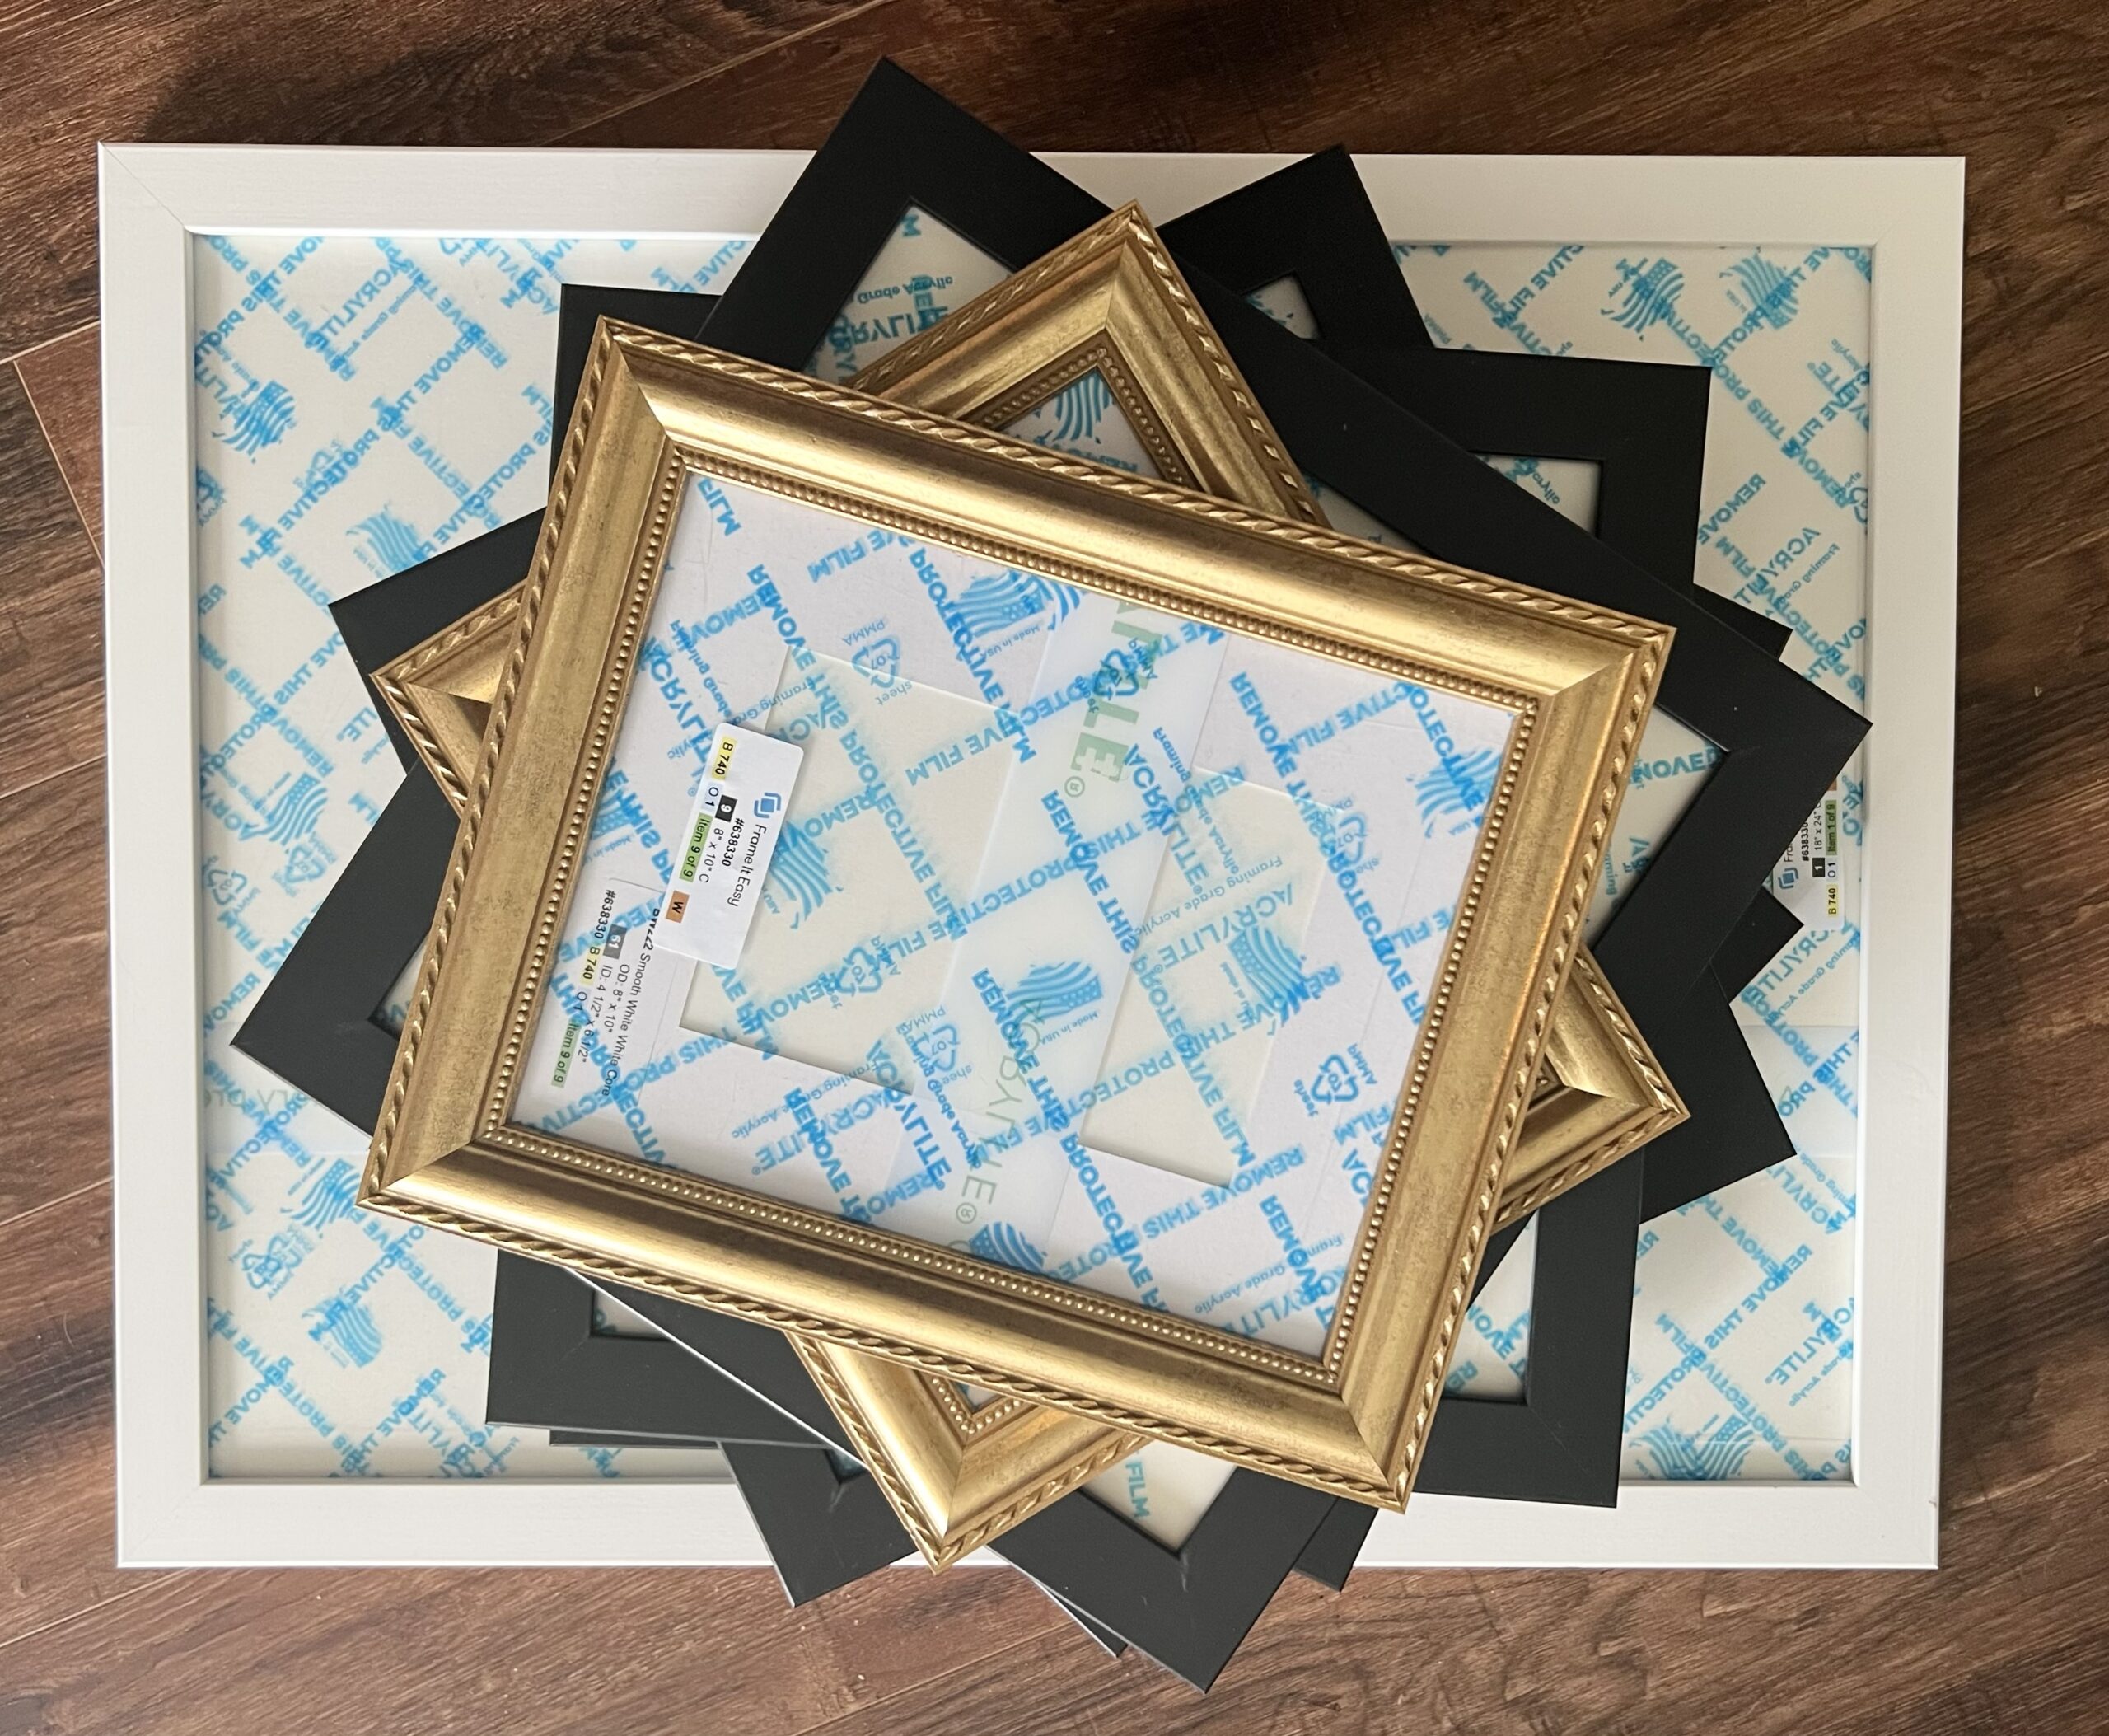 How to Frame a Picture: Your Guide to Choosing, Framing, and